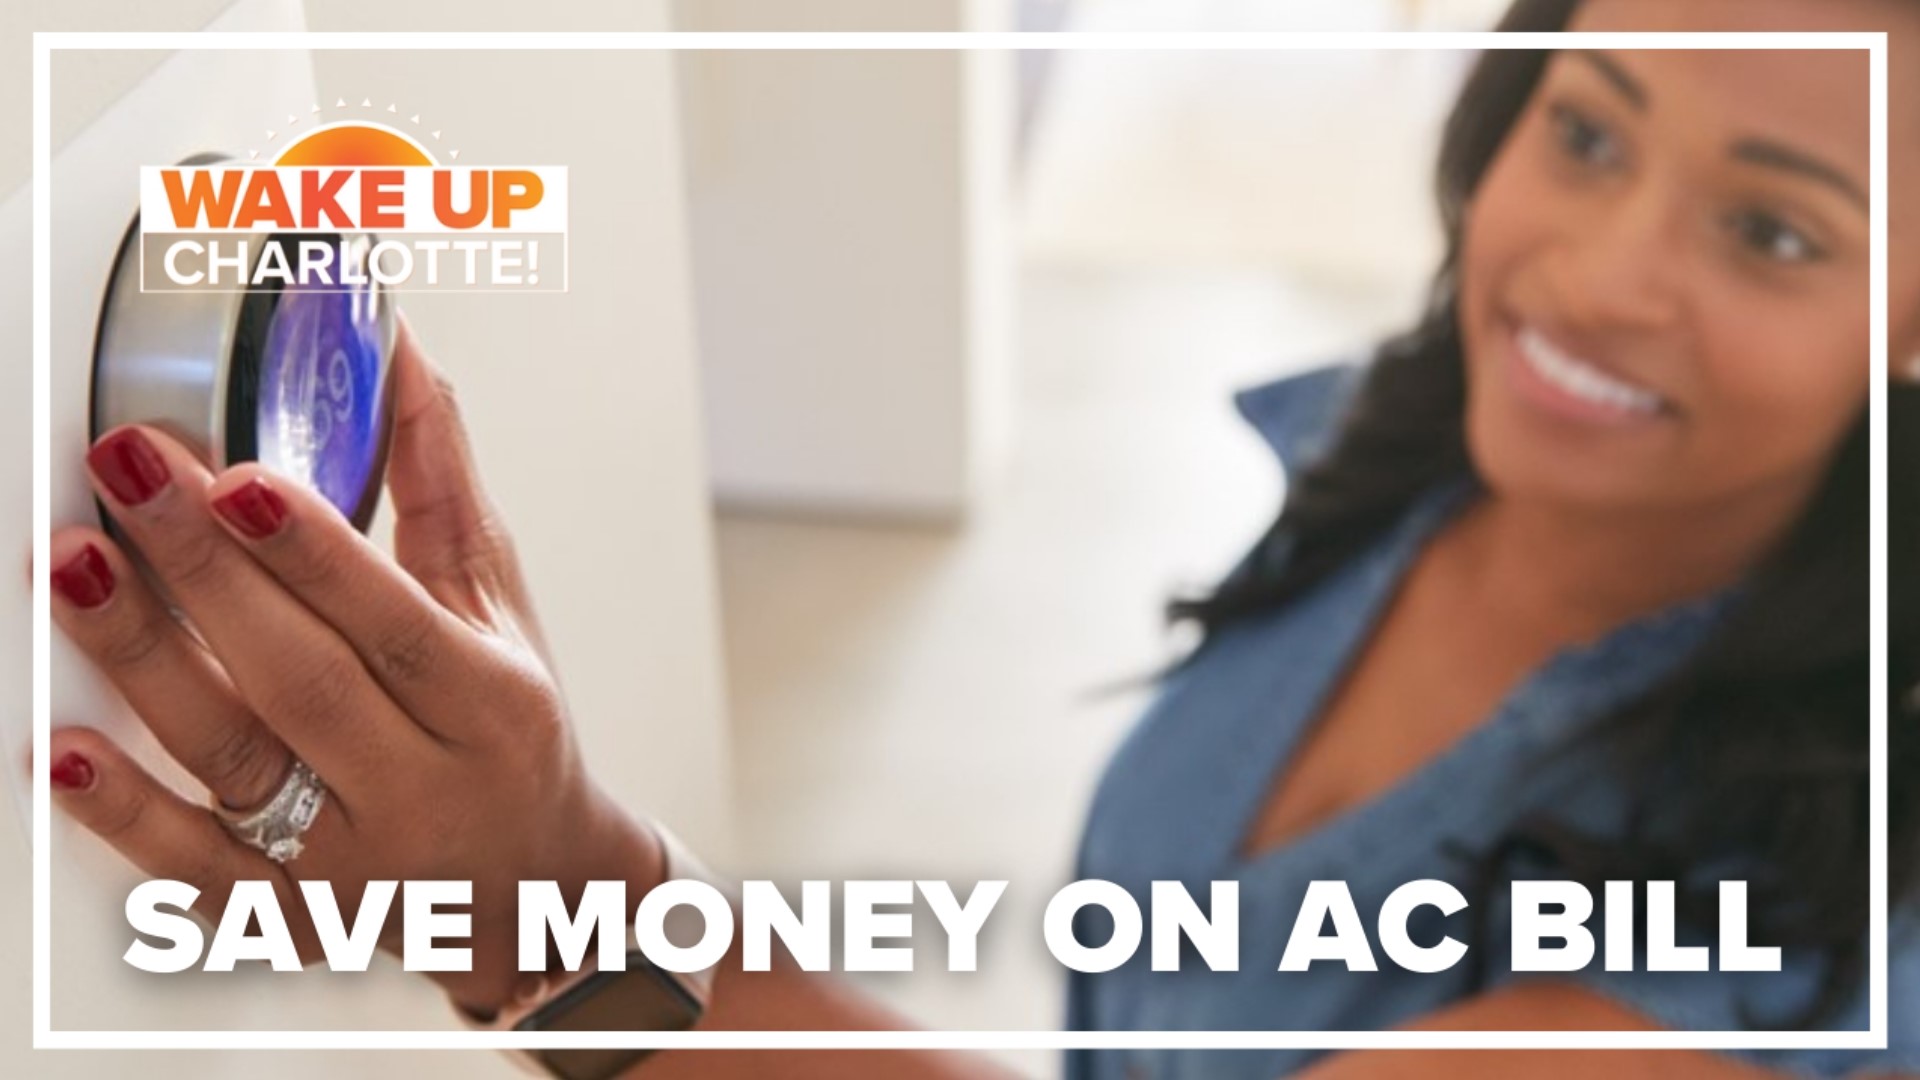 Many of you have probably flipped on that air conditioning. What are some are the best ways to stay cool and save money this summer?